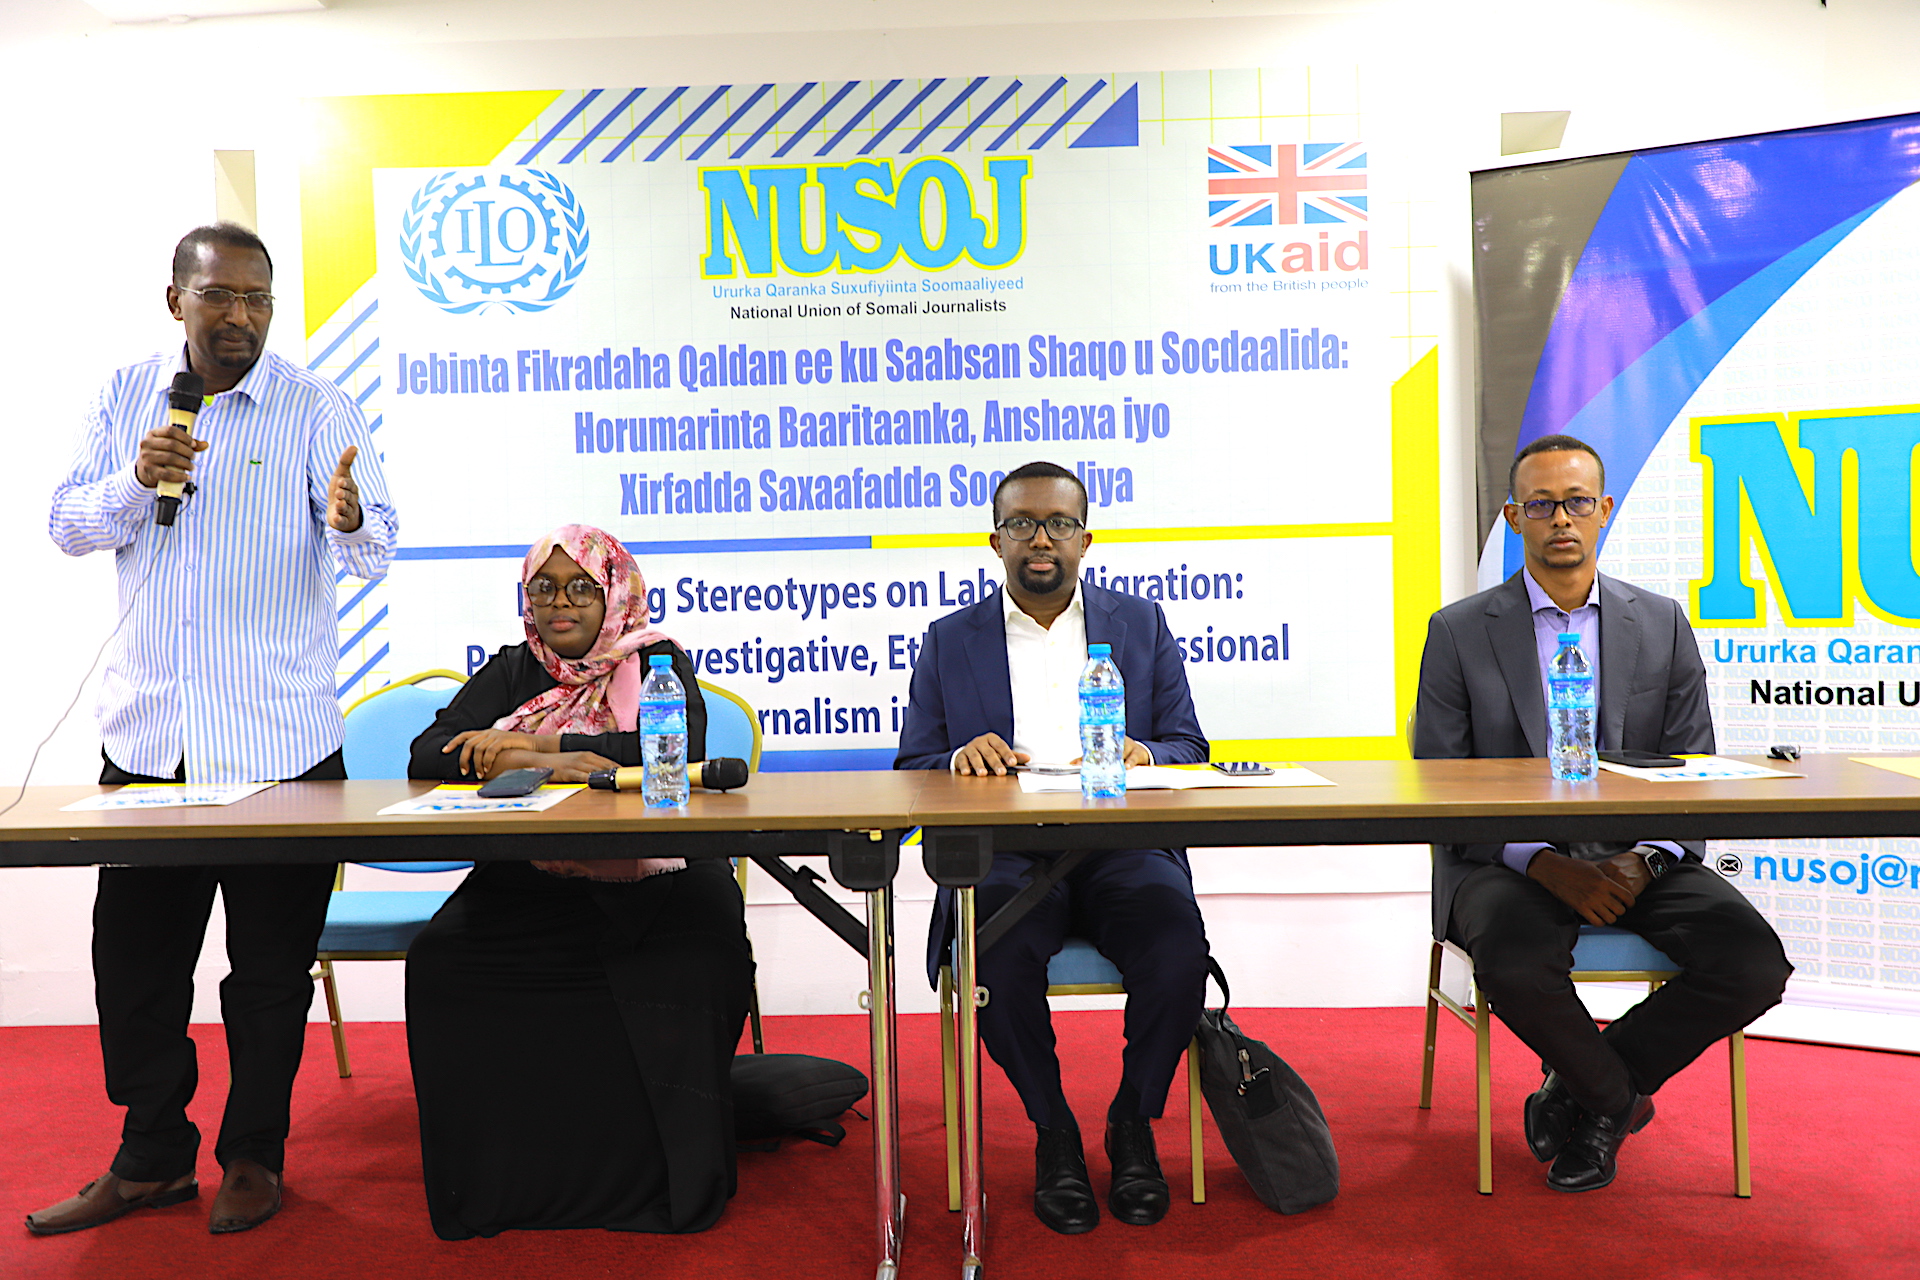 UK and ILO join forces to build the capacity and confidence of Somali journalists to report fairly on labour migration